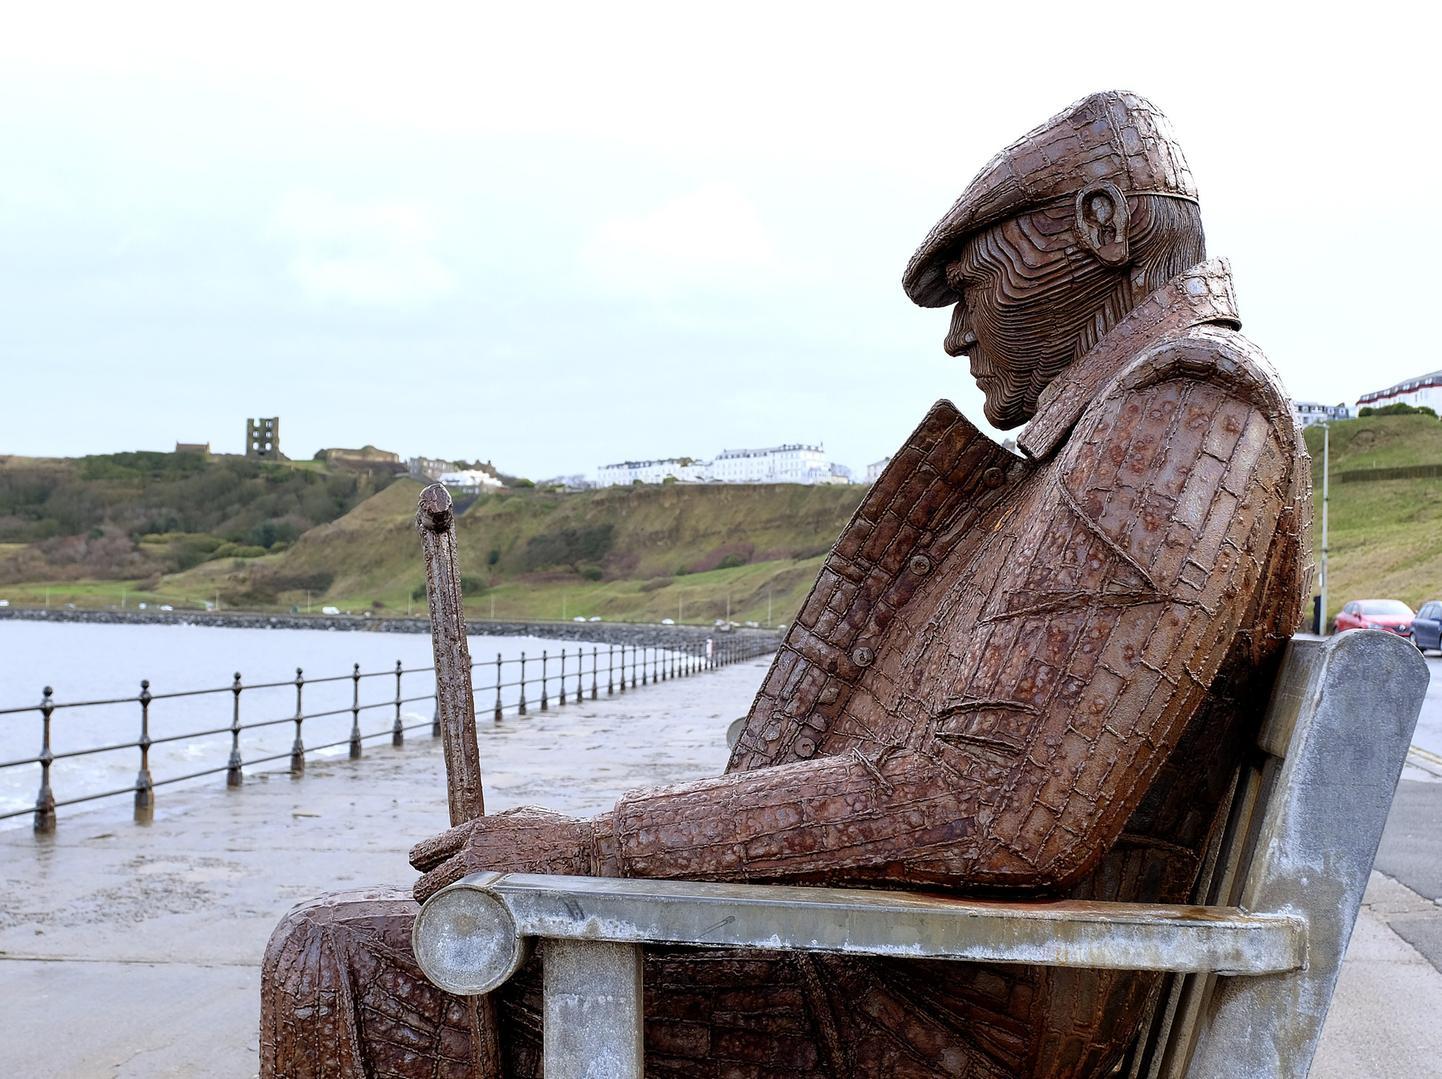 Away from the hustle and bustle of South Bay, North Bay has stunning views, and the statue of Freddie Gilroy provides you with a perfect spot to stop and ask the question.